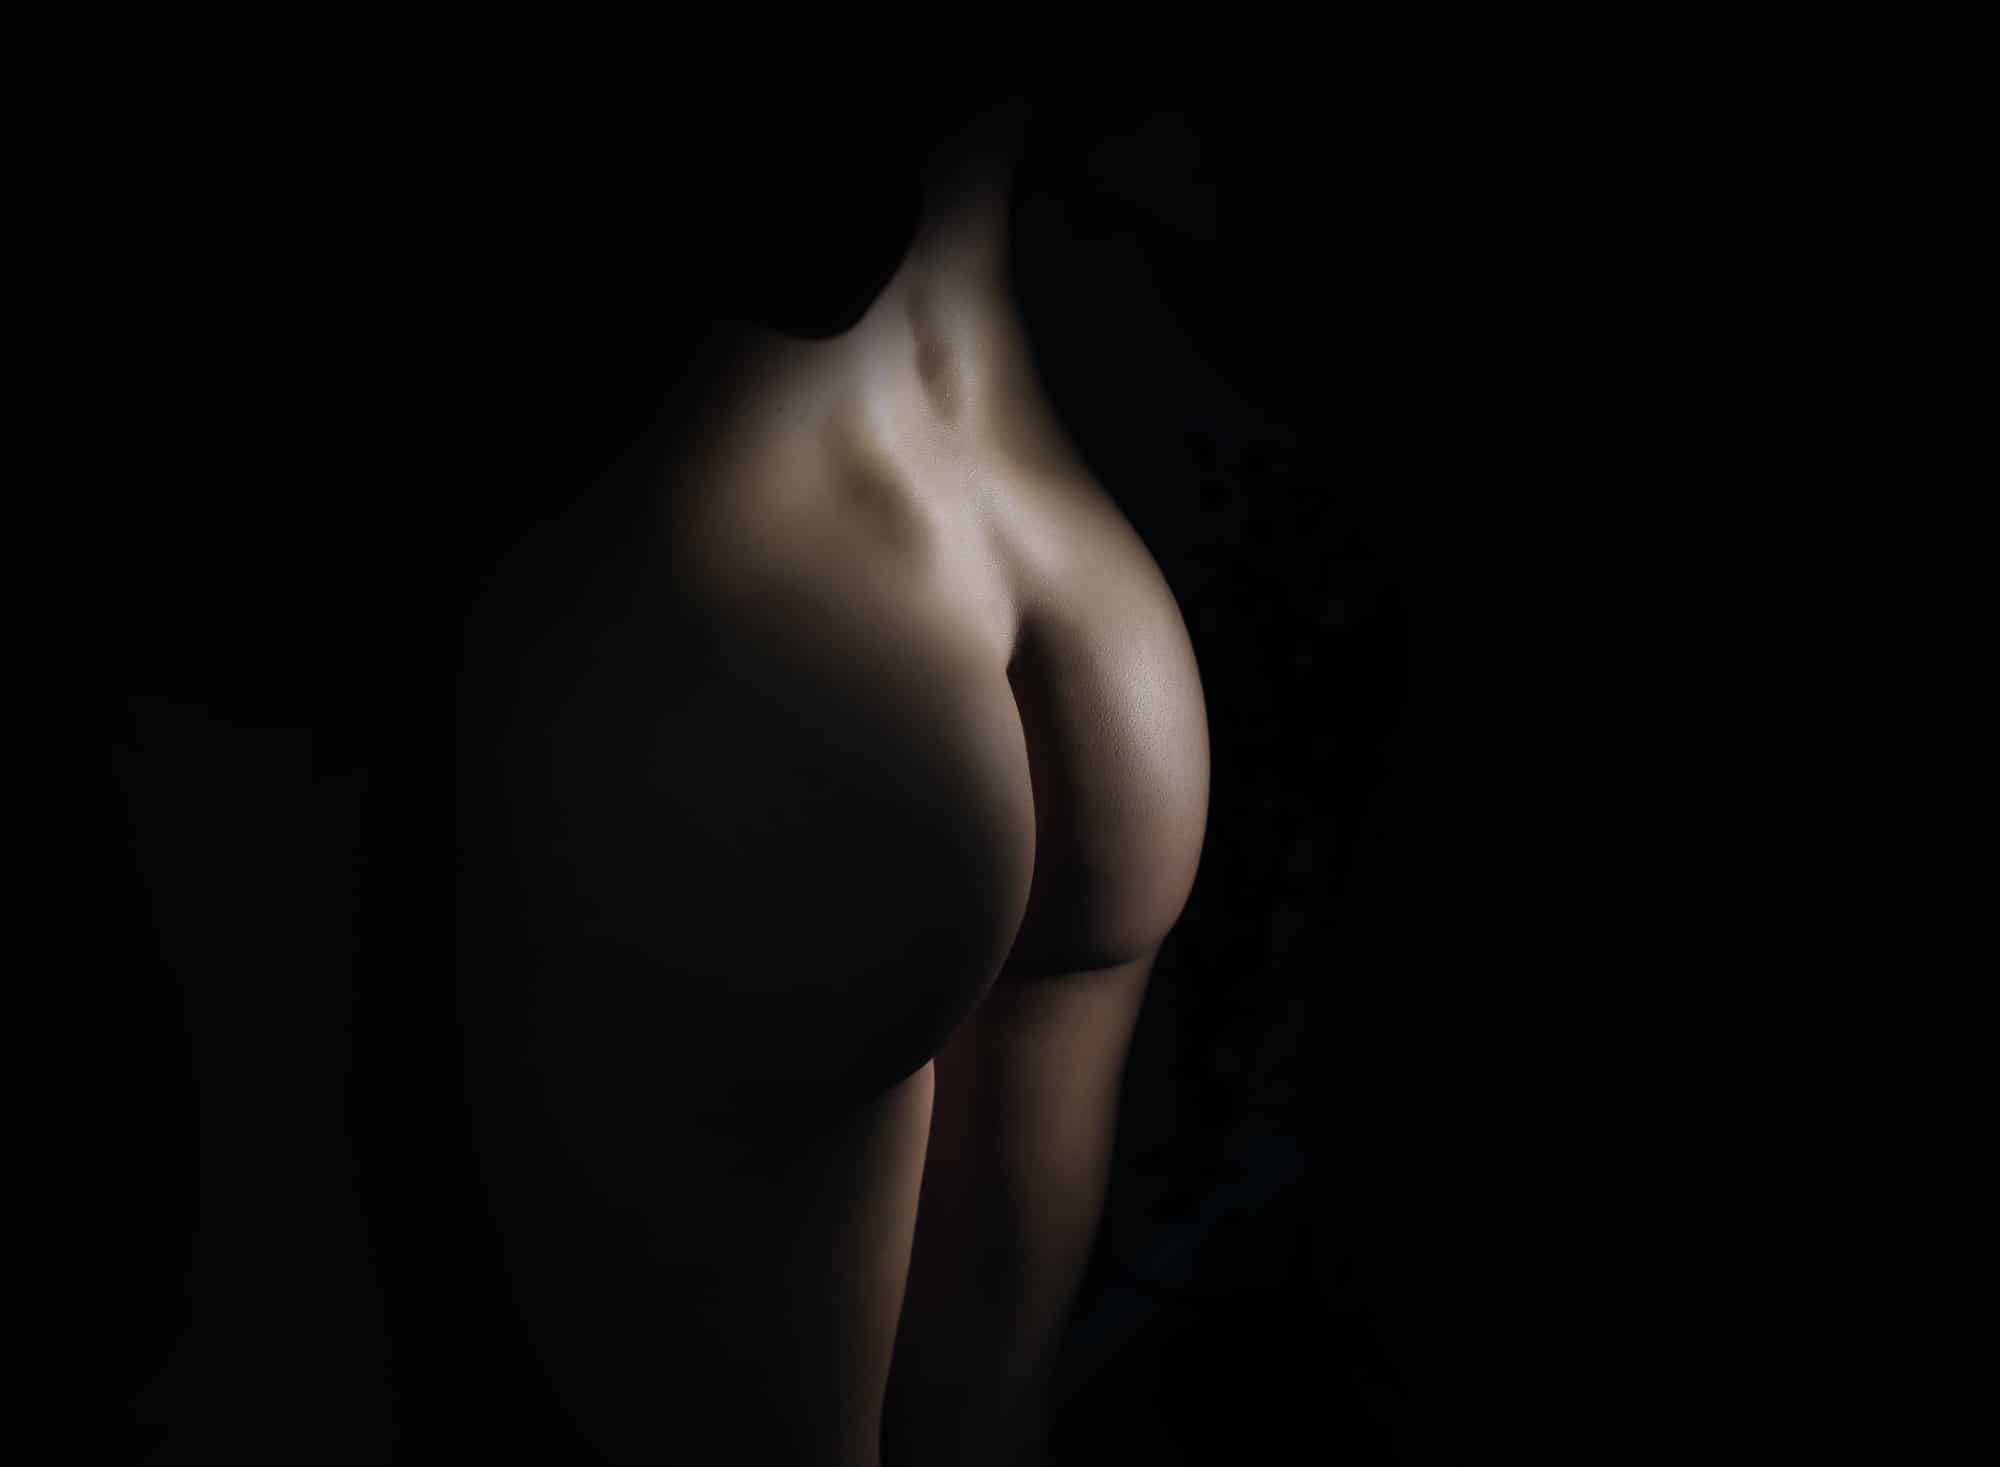 up close image of a nude-woman butt with light focused on her